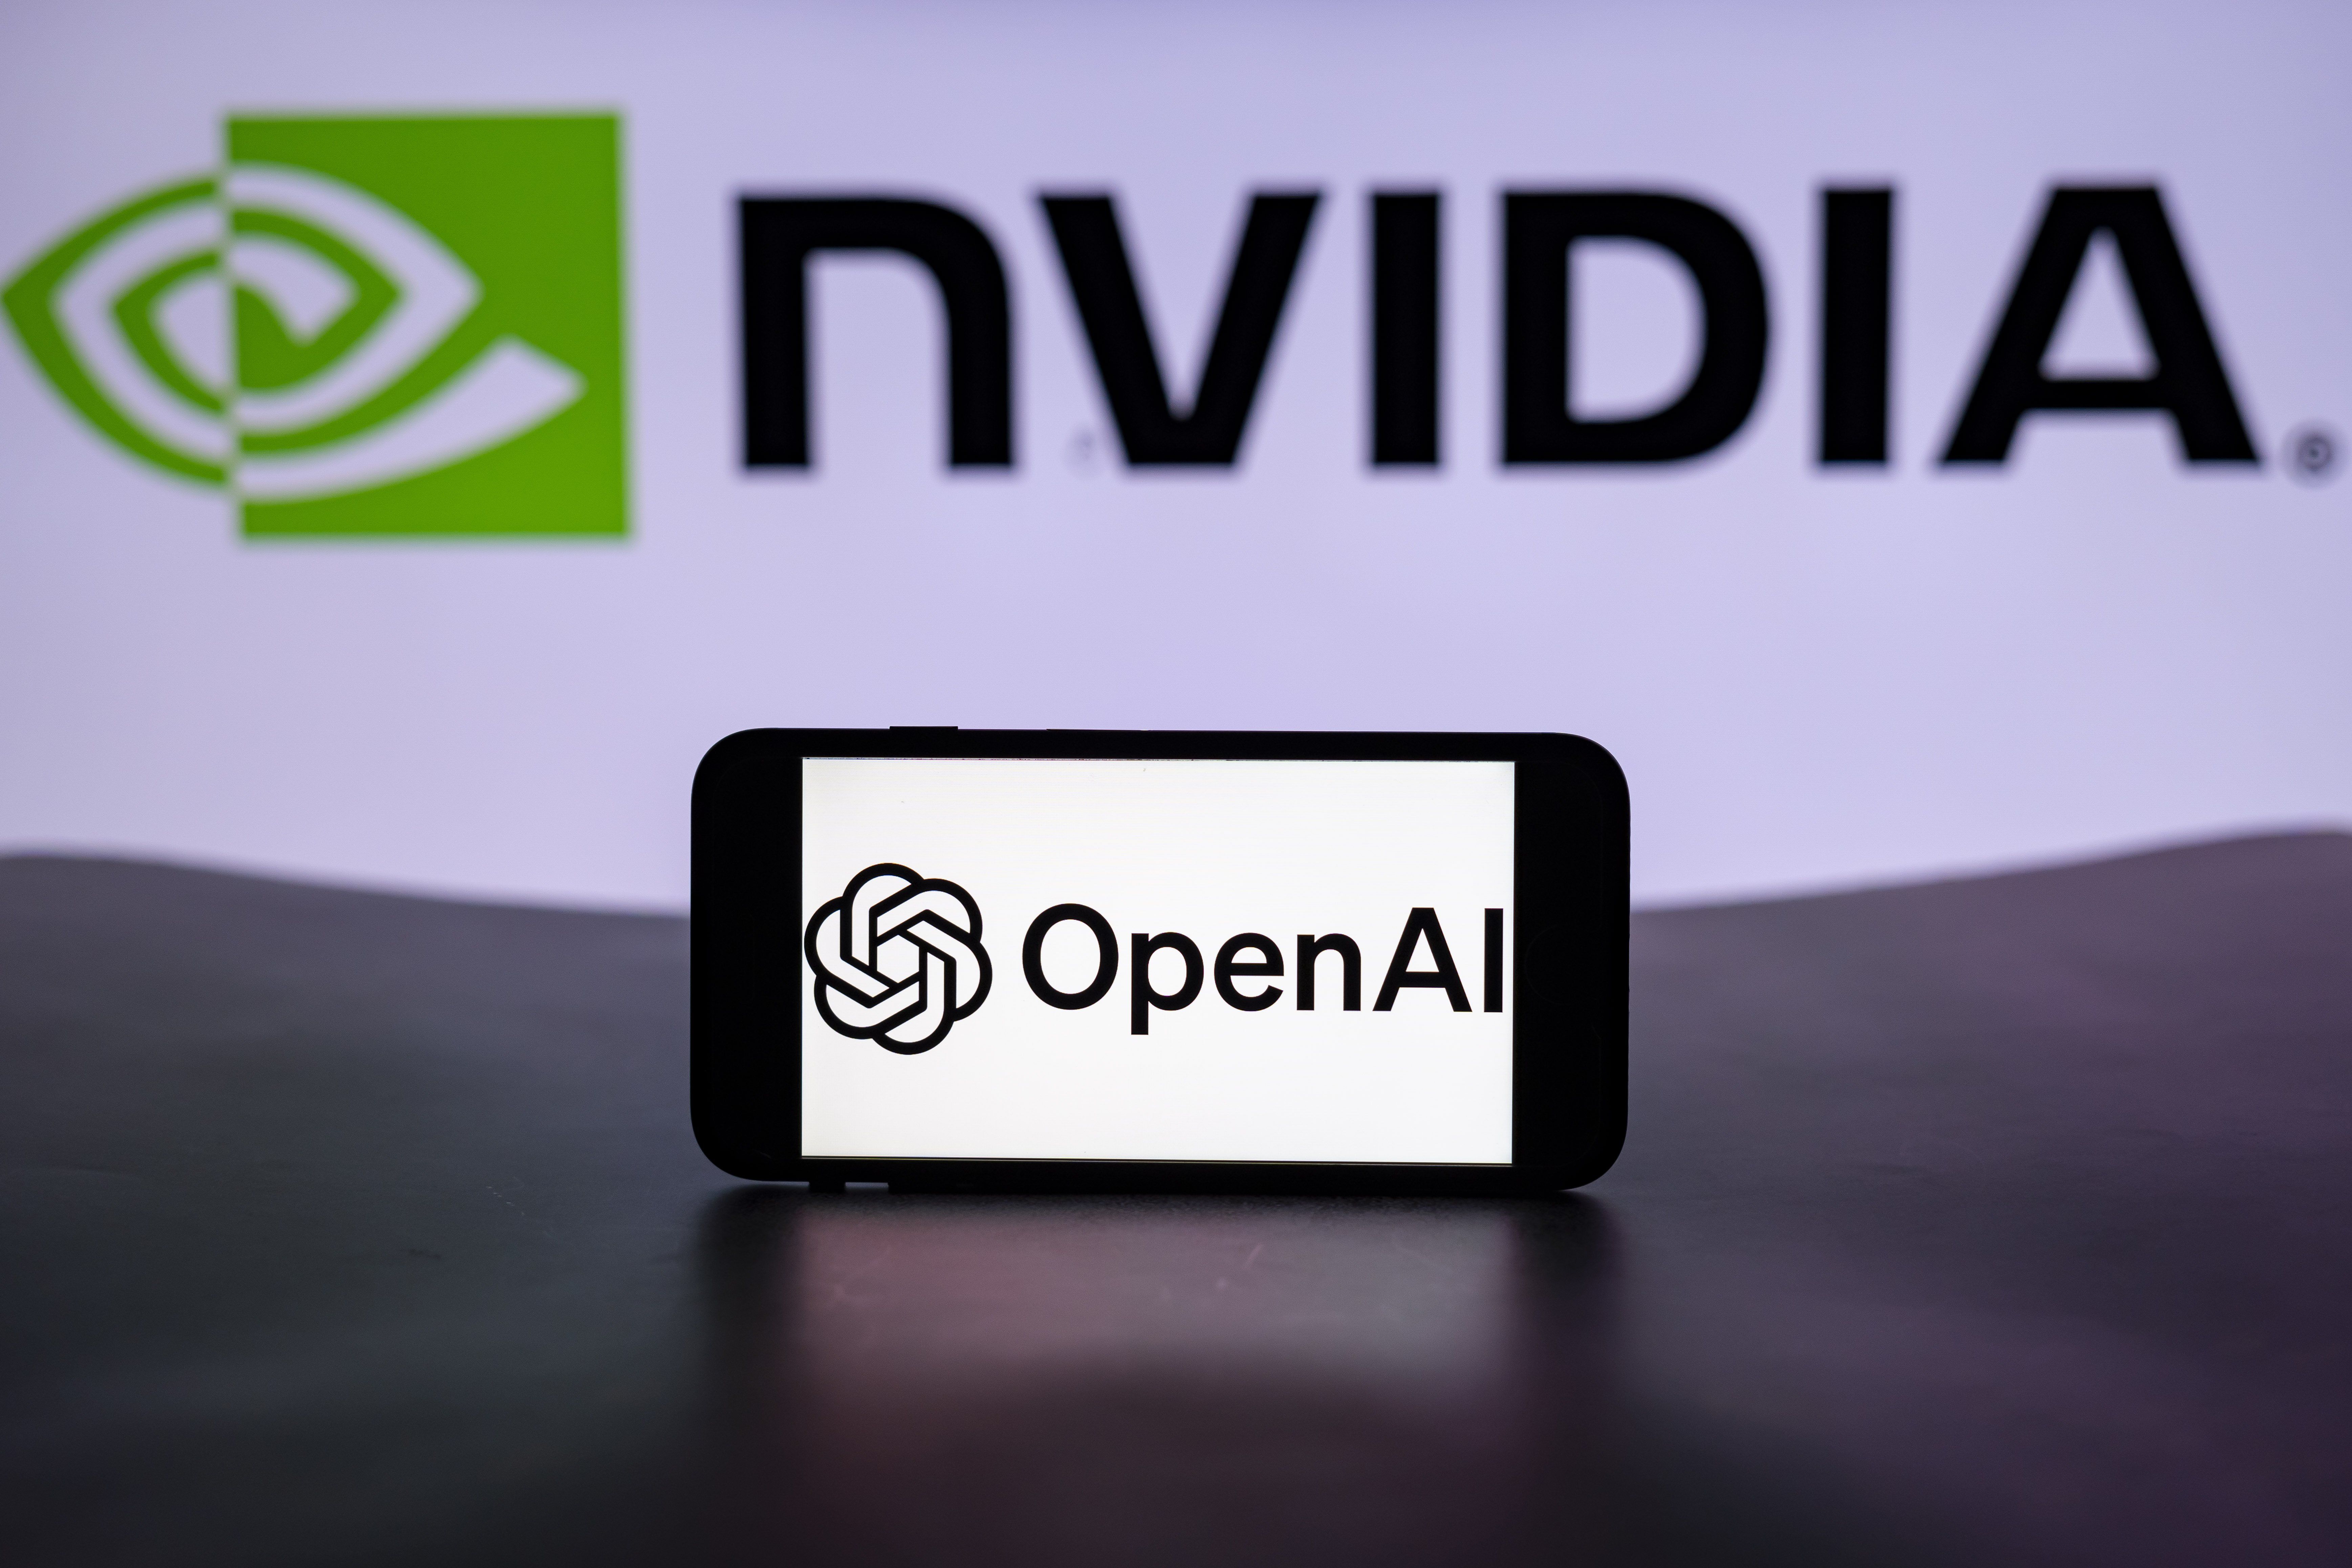 The logo of OpenAI is seen displayed on a mobile phone screen with the Nvidia logo in the background. 